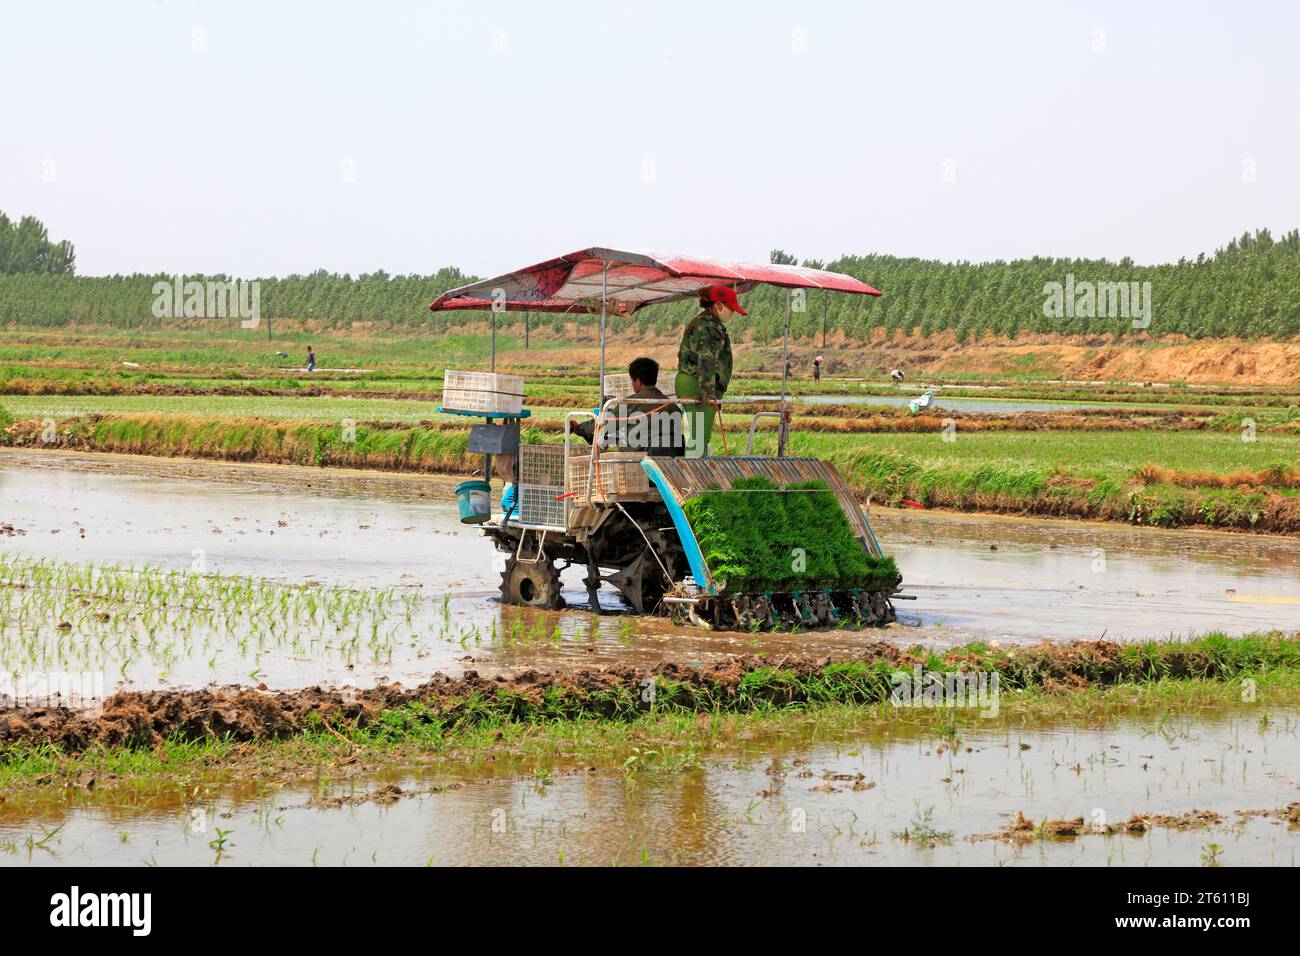 Tangshan city - May 29: rice planting mechanization operation in the fields, on May 29, 2016, tangshan city, hebei province, China Stock Photo